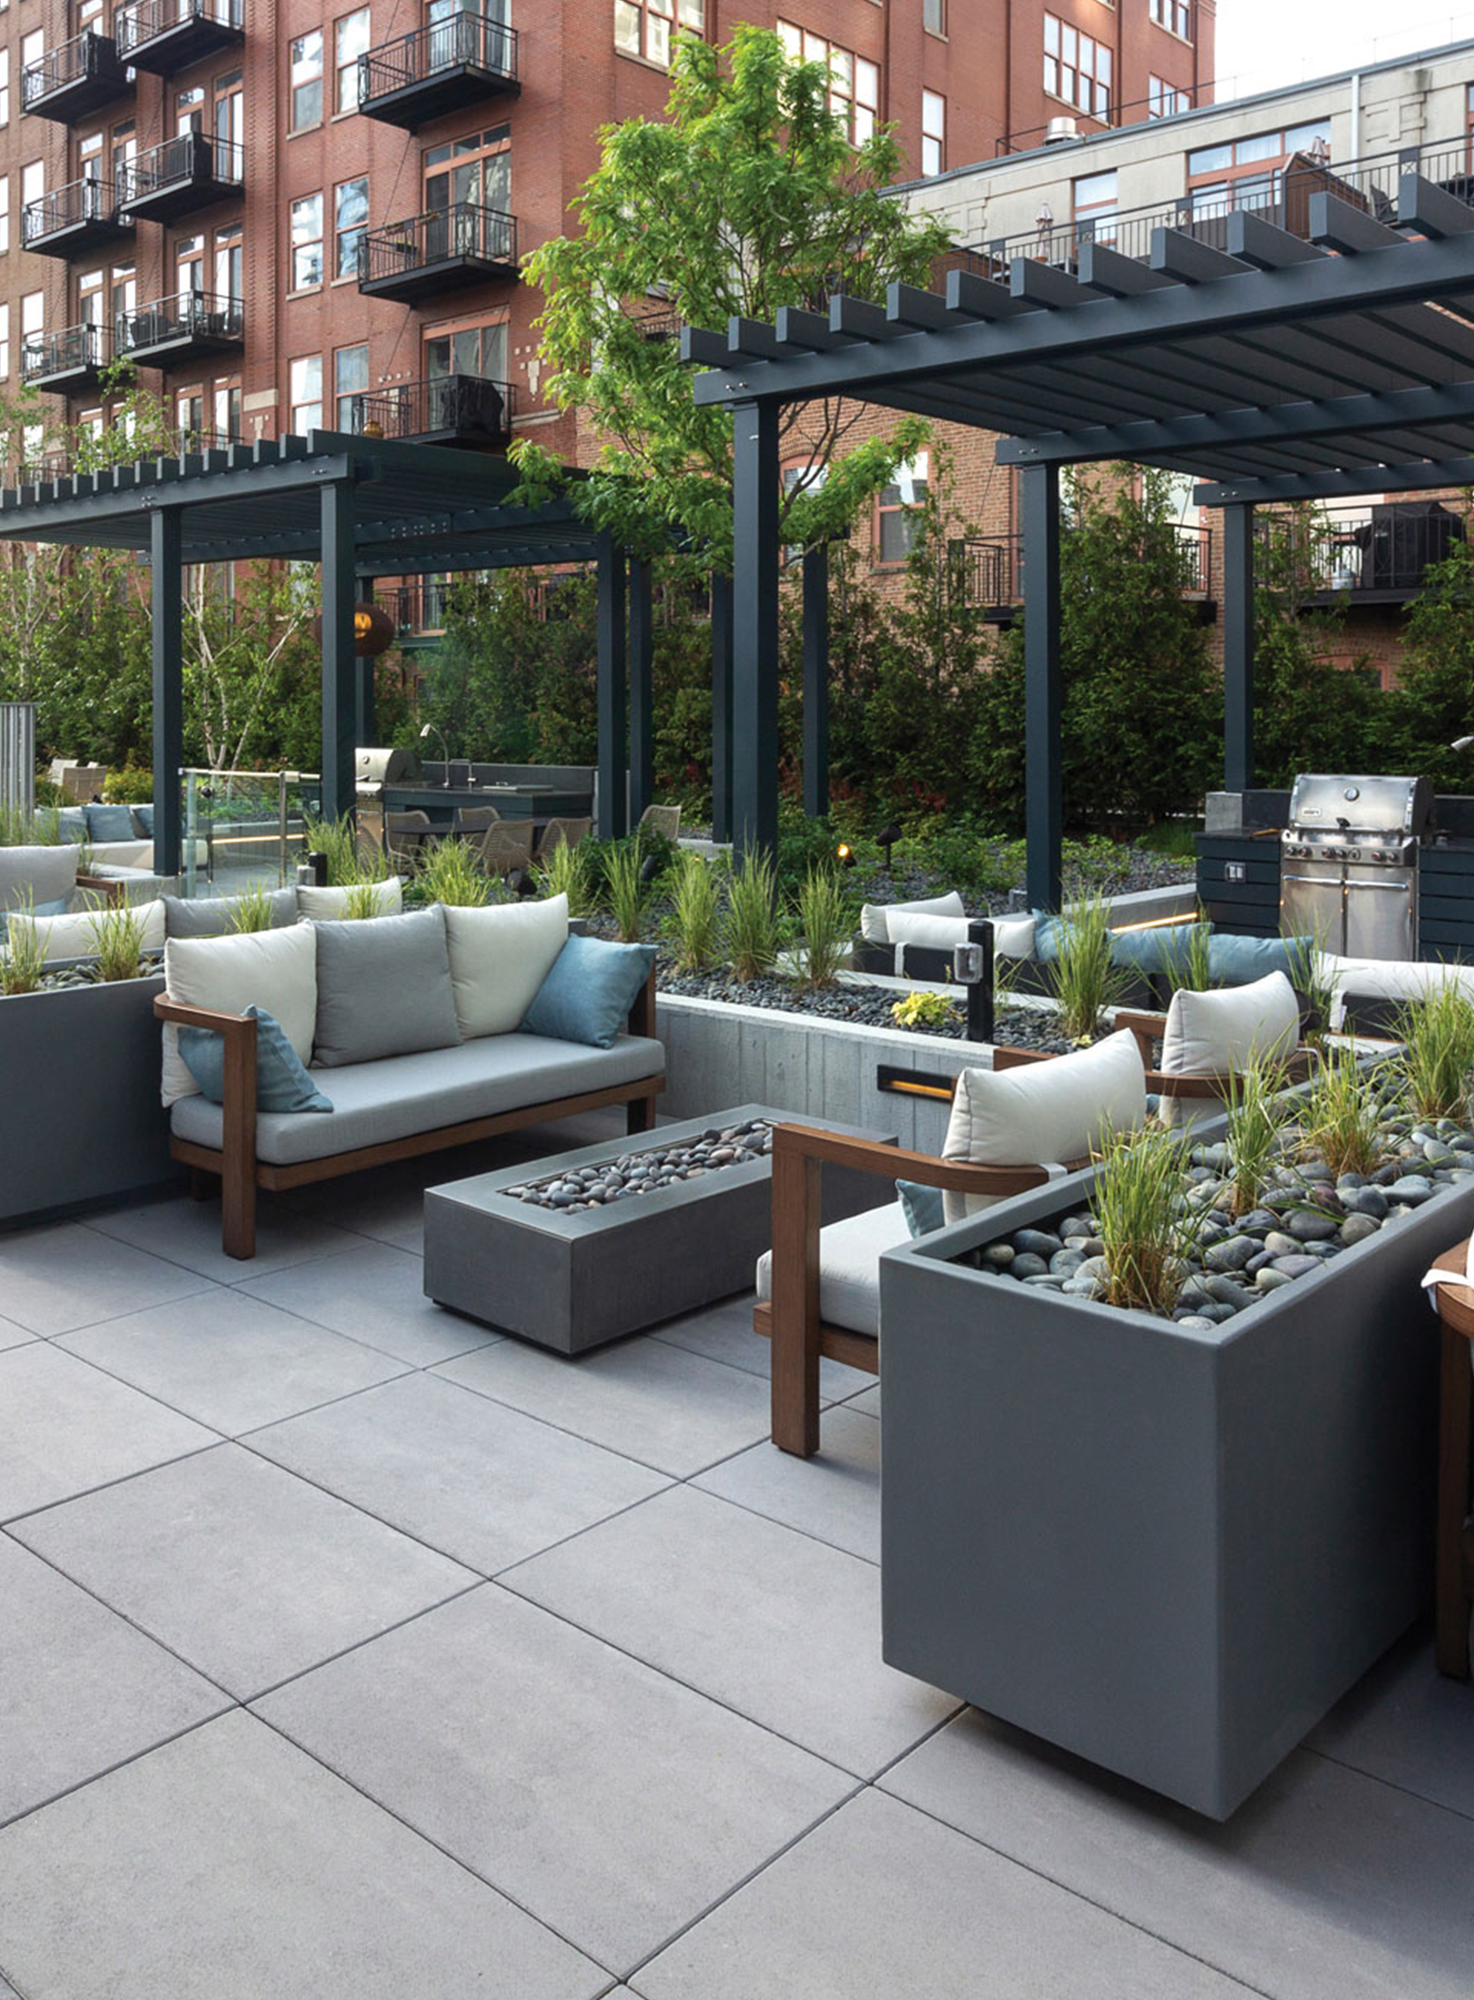 A Chicago roof deck amenity space paved with Unilock Beacon Hill Smooth XL features conversation areas, plant boxes, and outdoor kitchens.